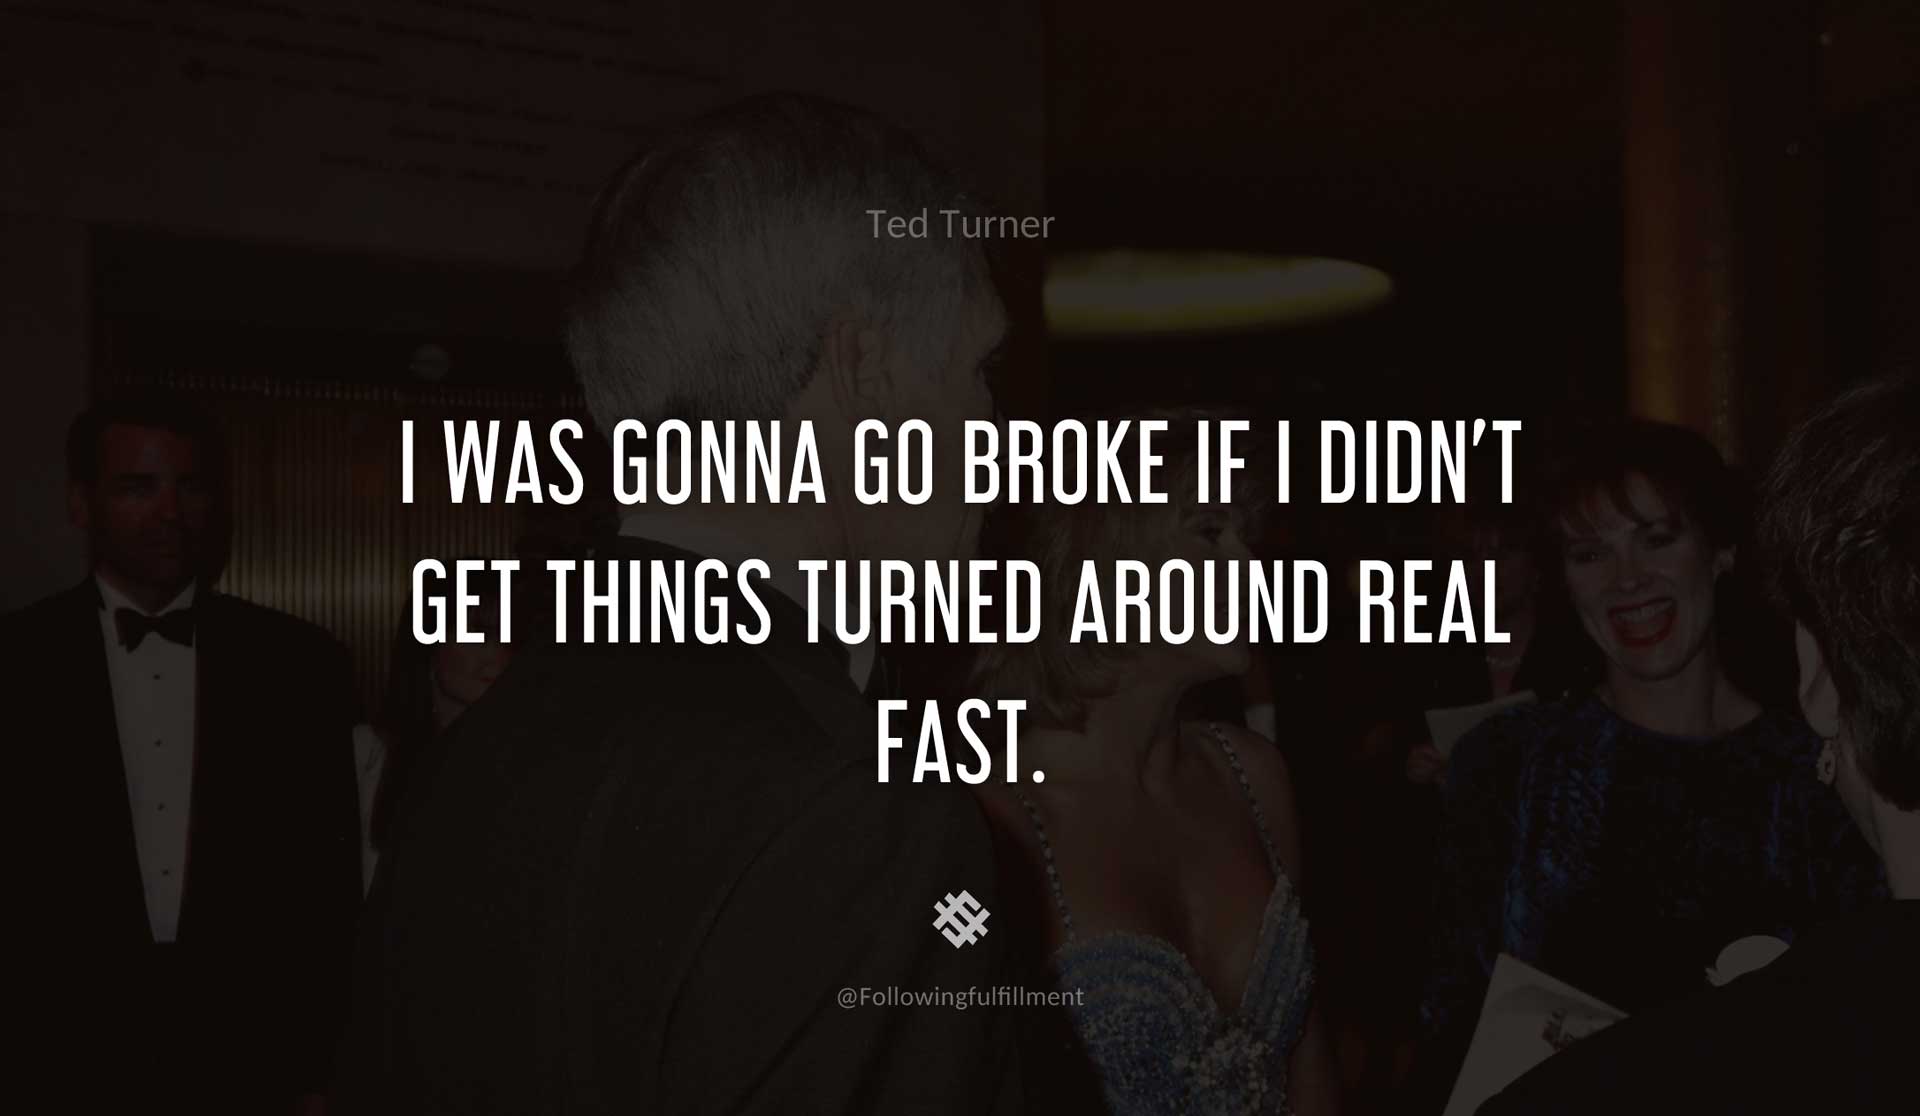 I-was-gonna-go-broke-if-I-didn't-get-things-turned-around-real-fast.-TED-TURNER-Quote.jpg